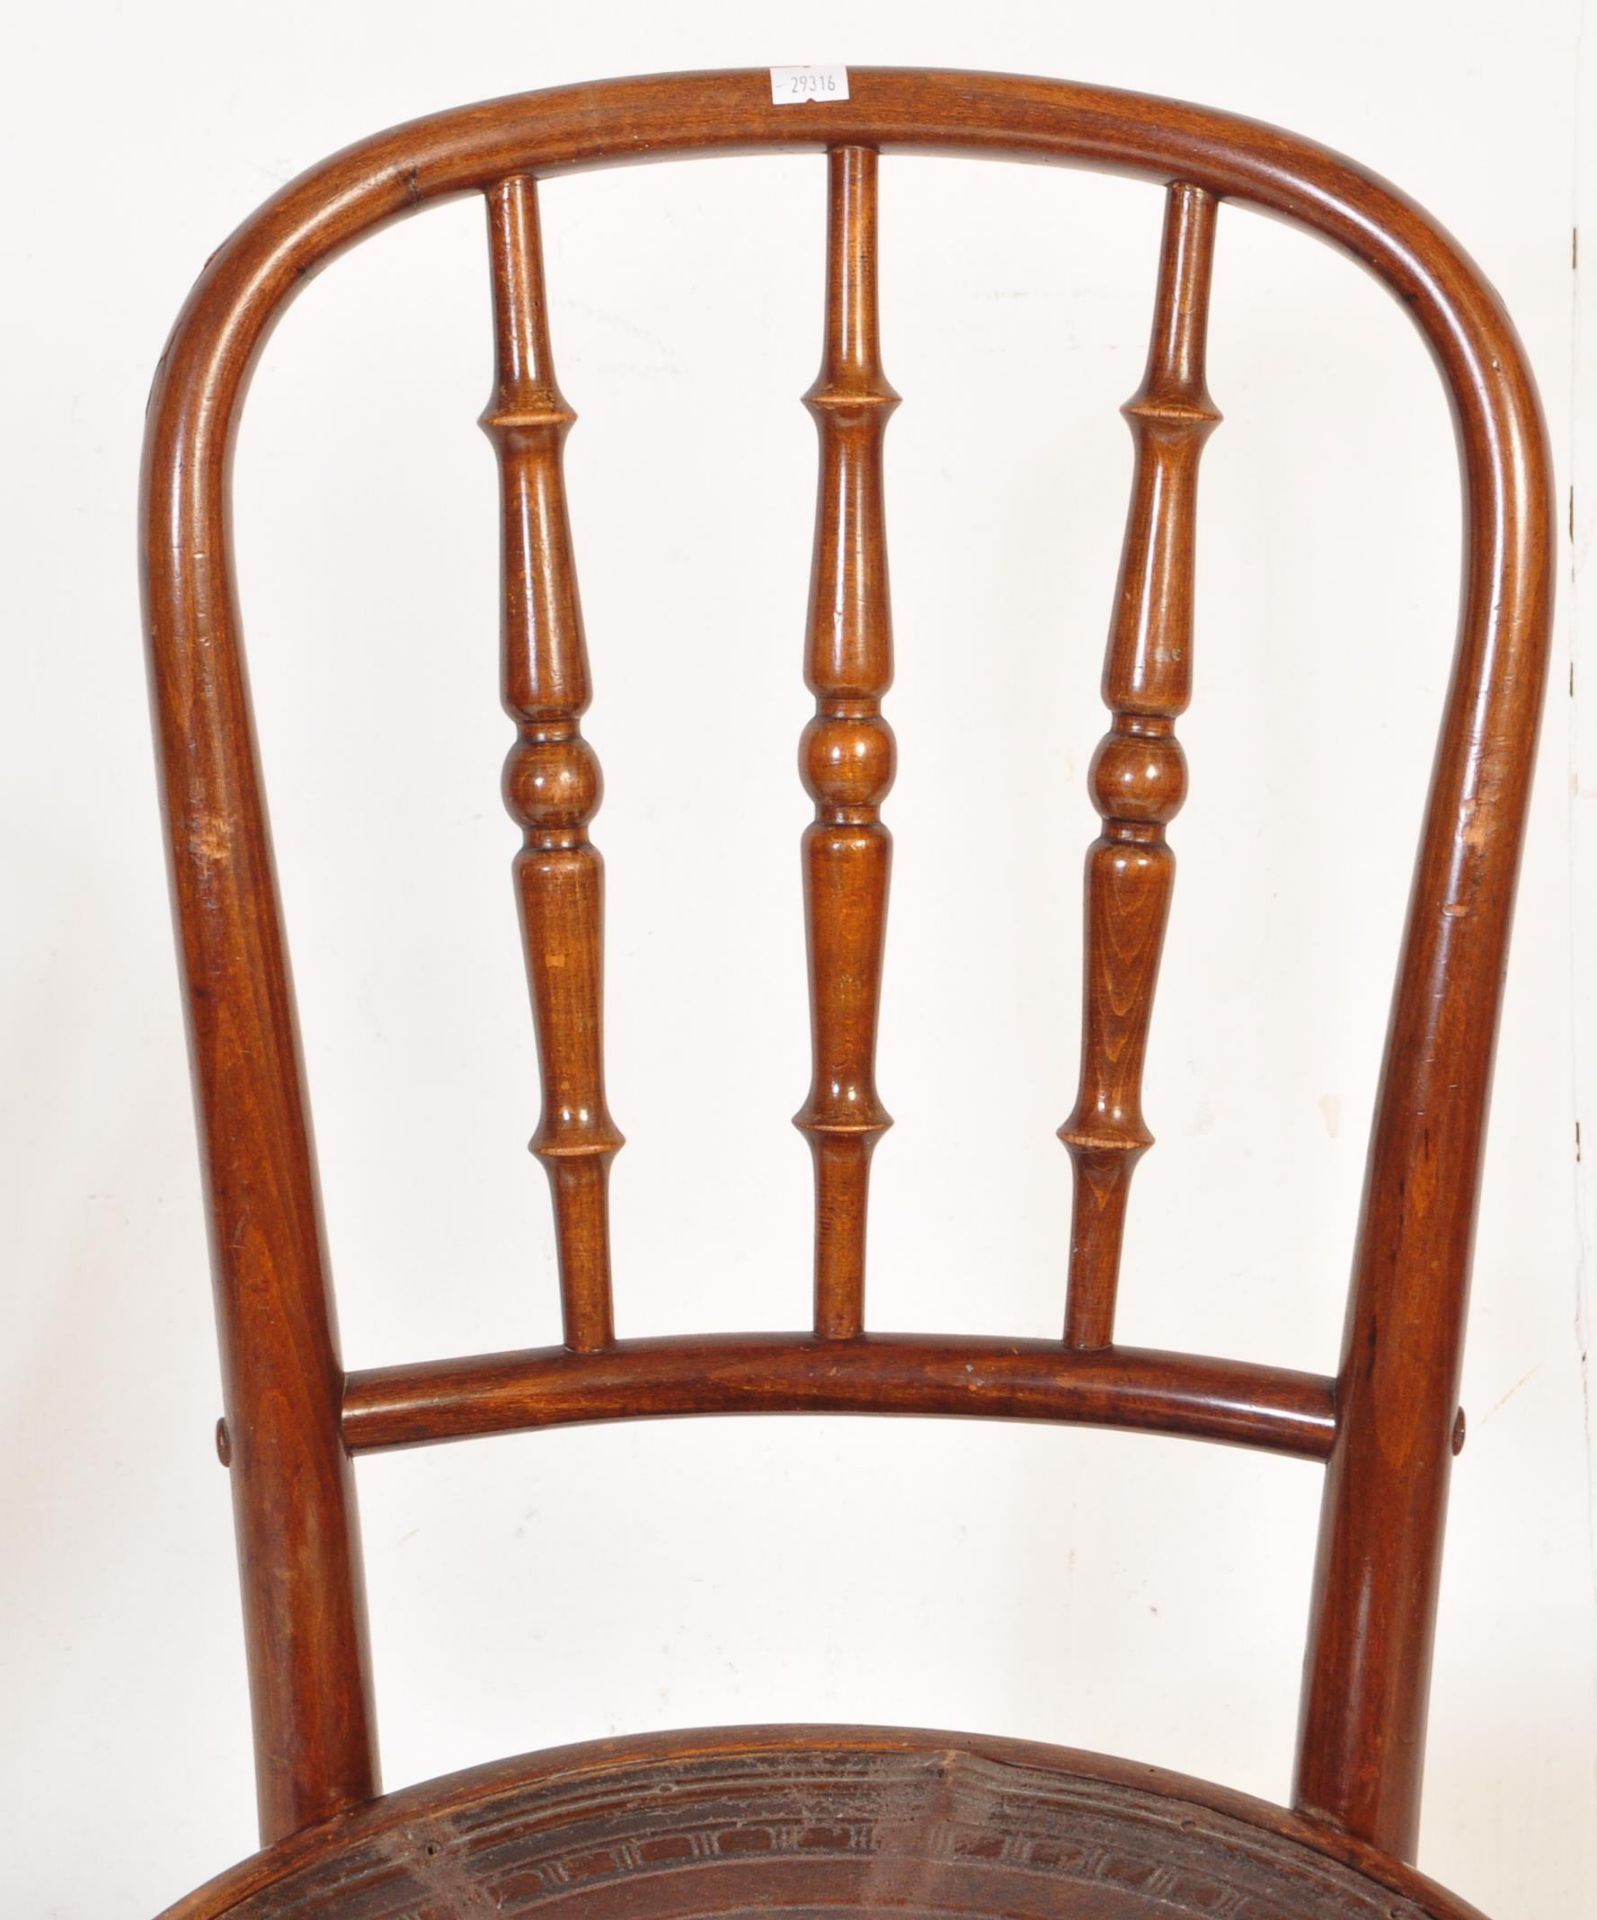 PAIR OF MID 20TH CENTURY BENTWOOD CAFE CHAIRS - Image 4 of 8